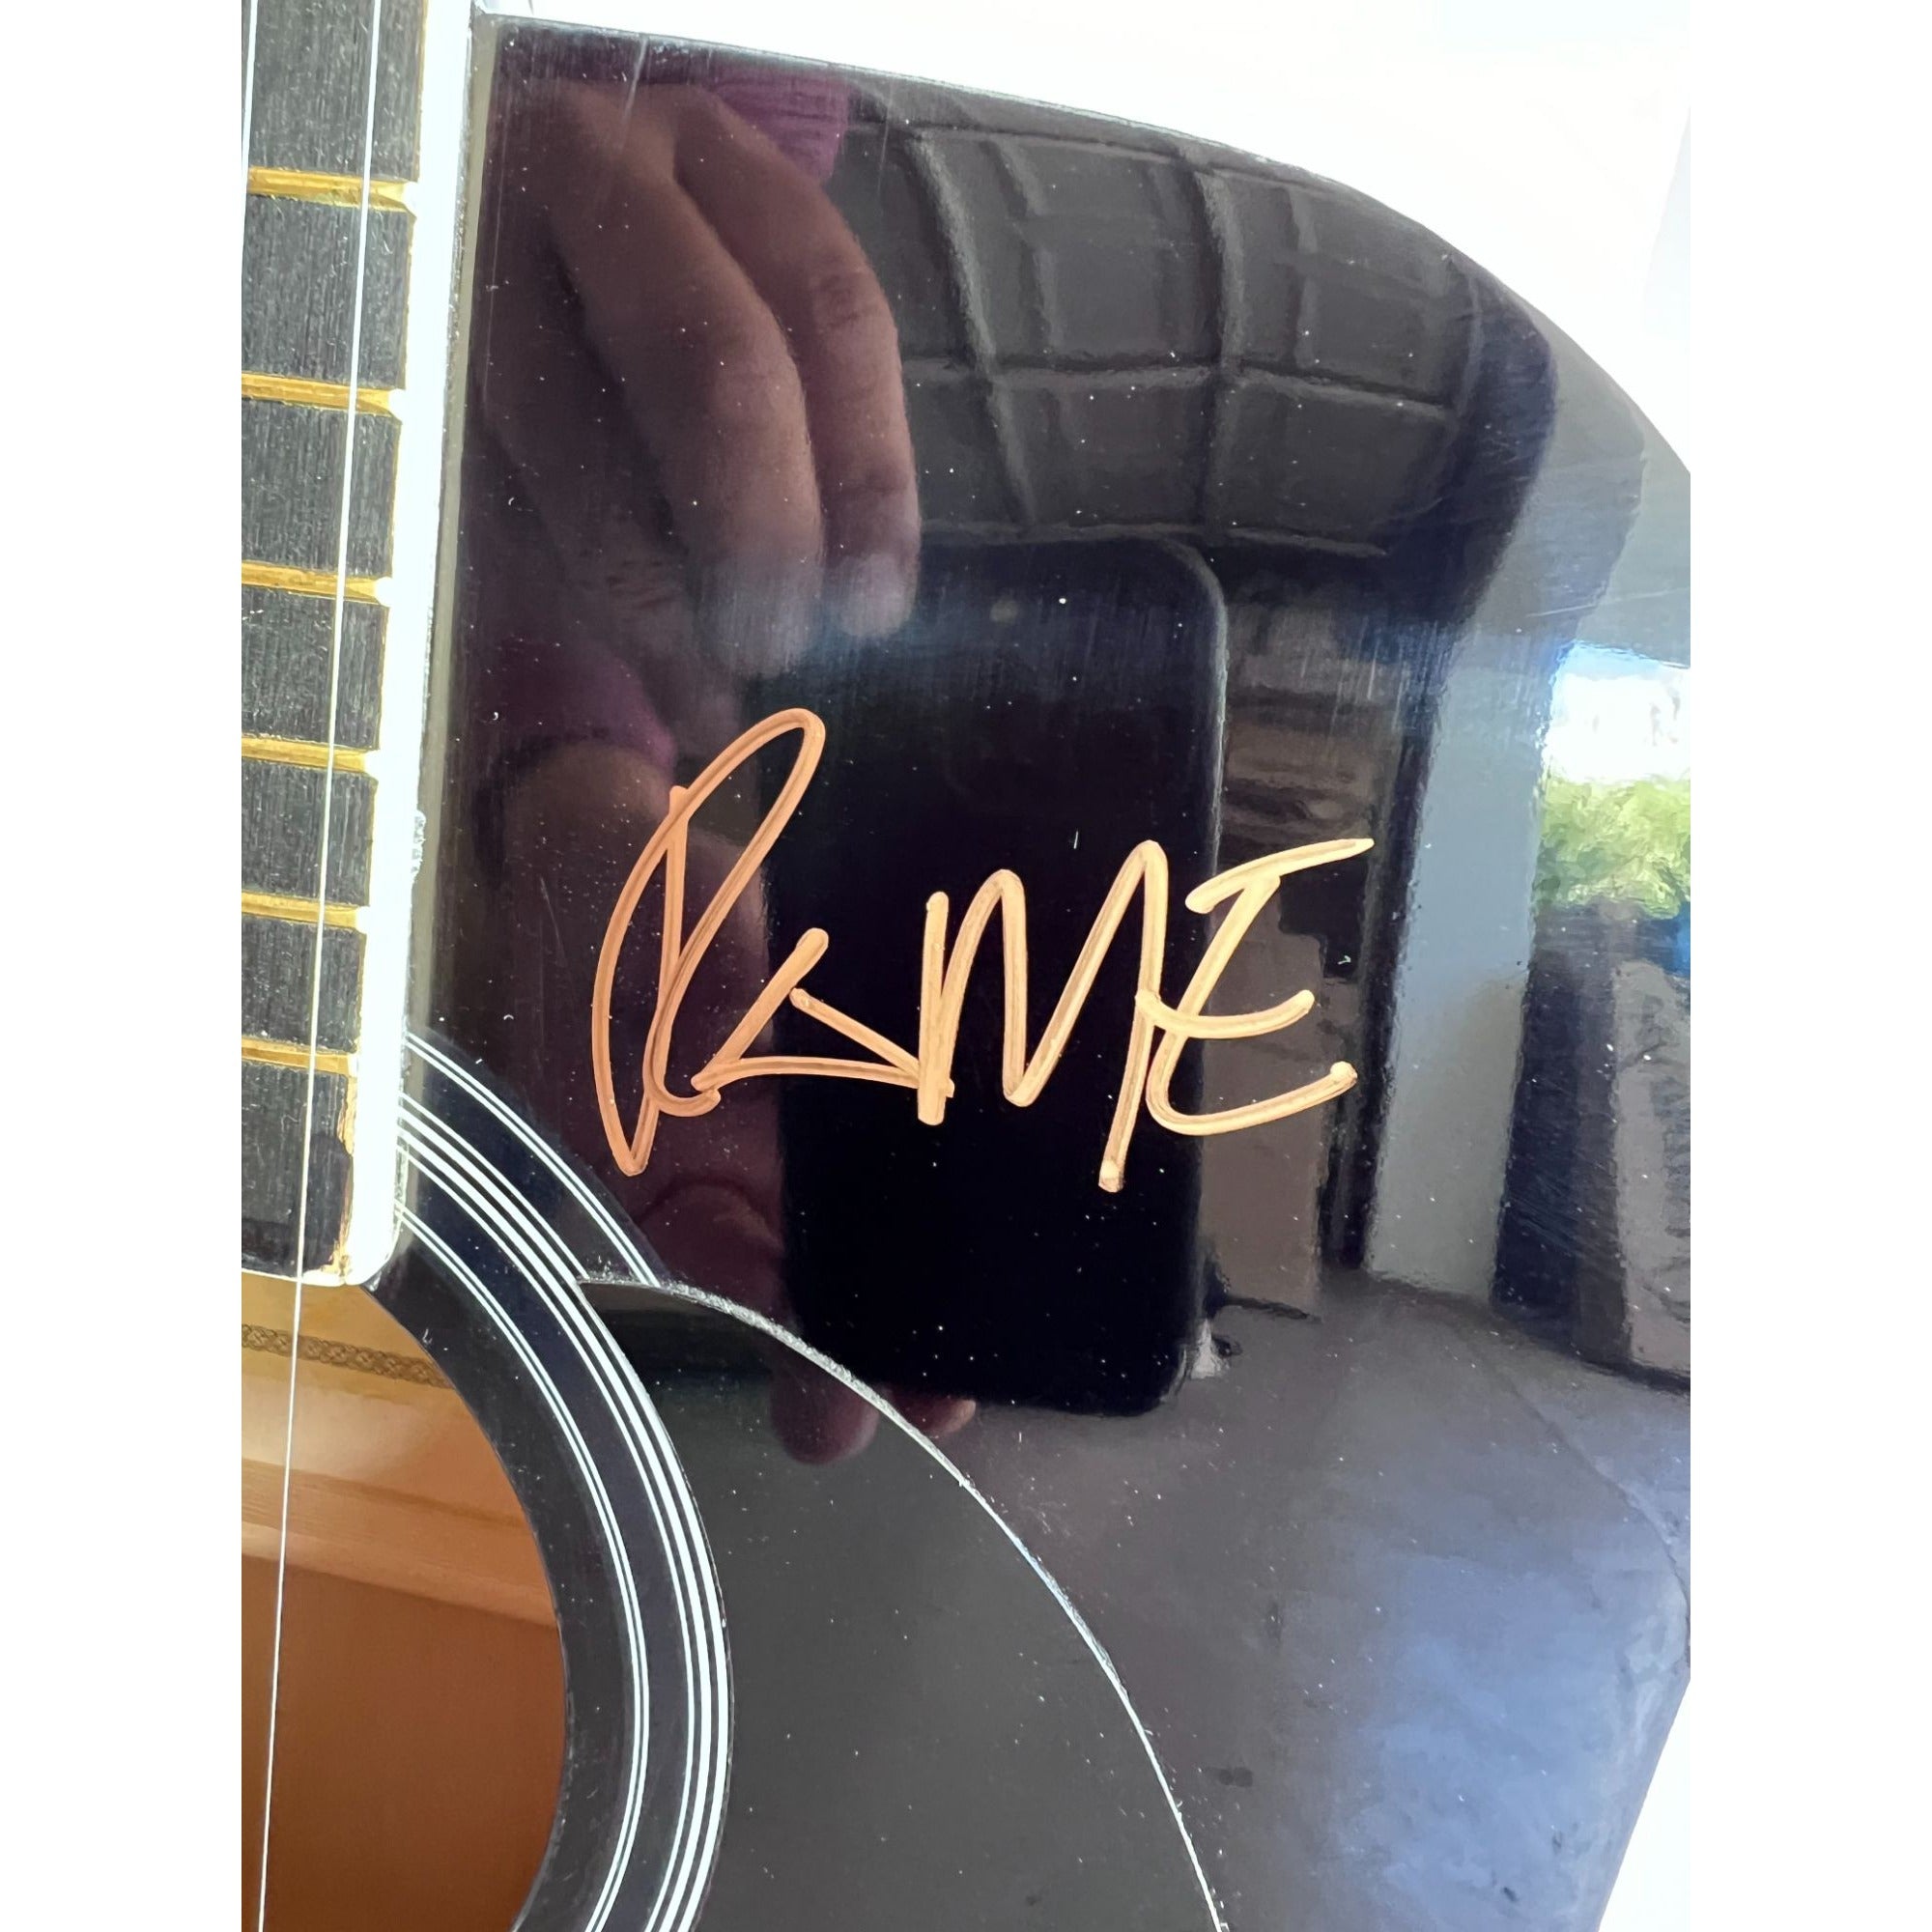 Sublime Bradley Nowell, Bud Gough, and Eric Wilson full size acoustic guitar signed